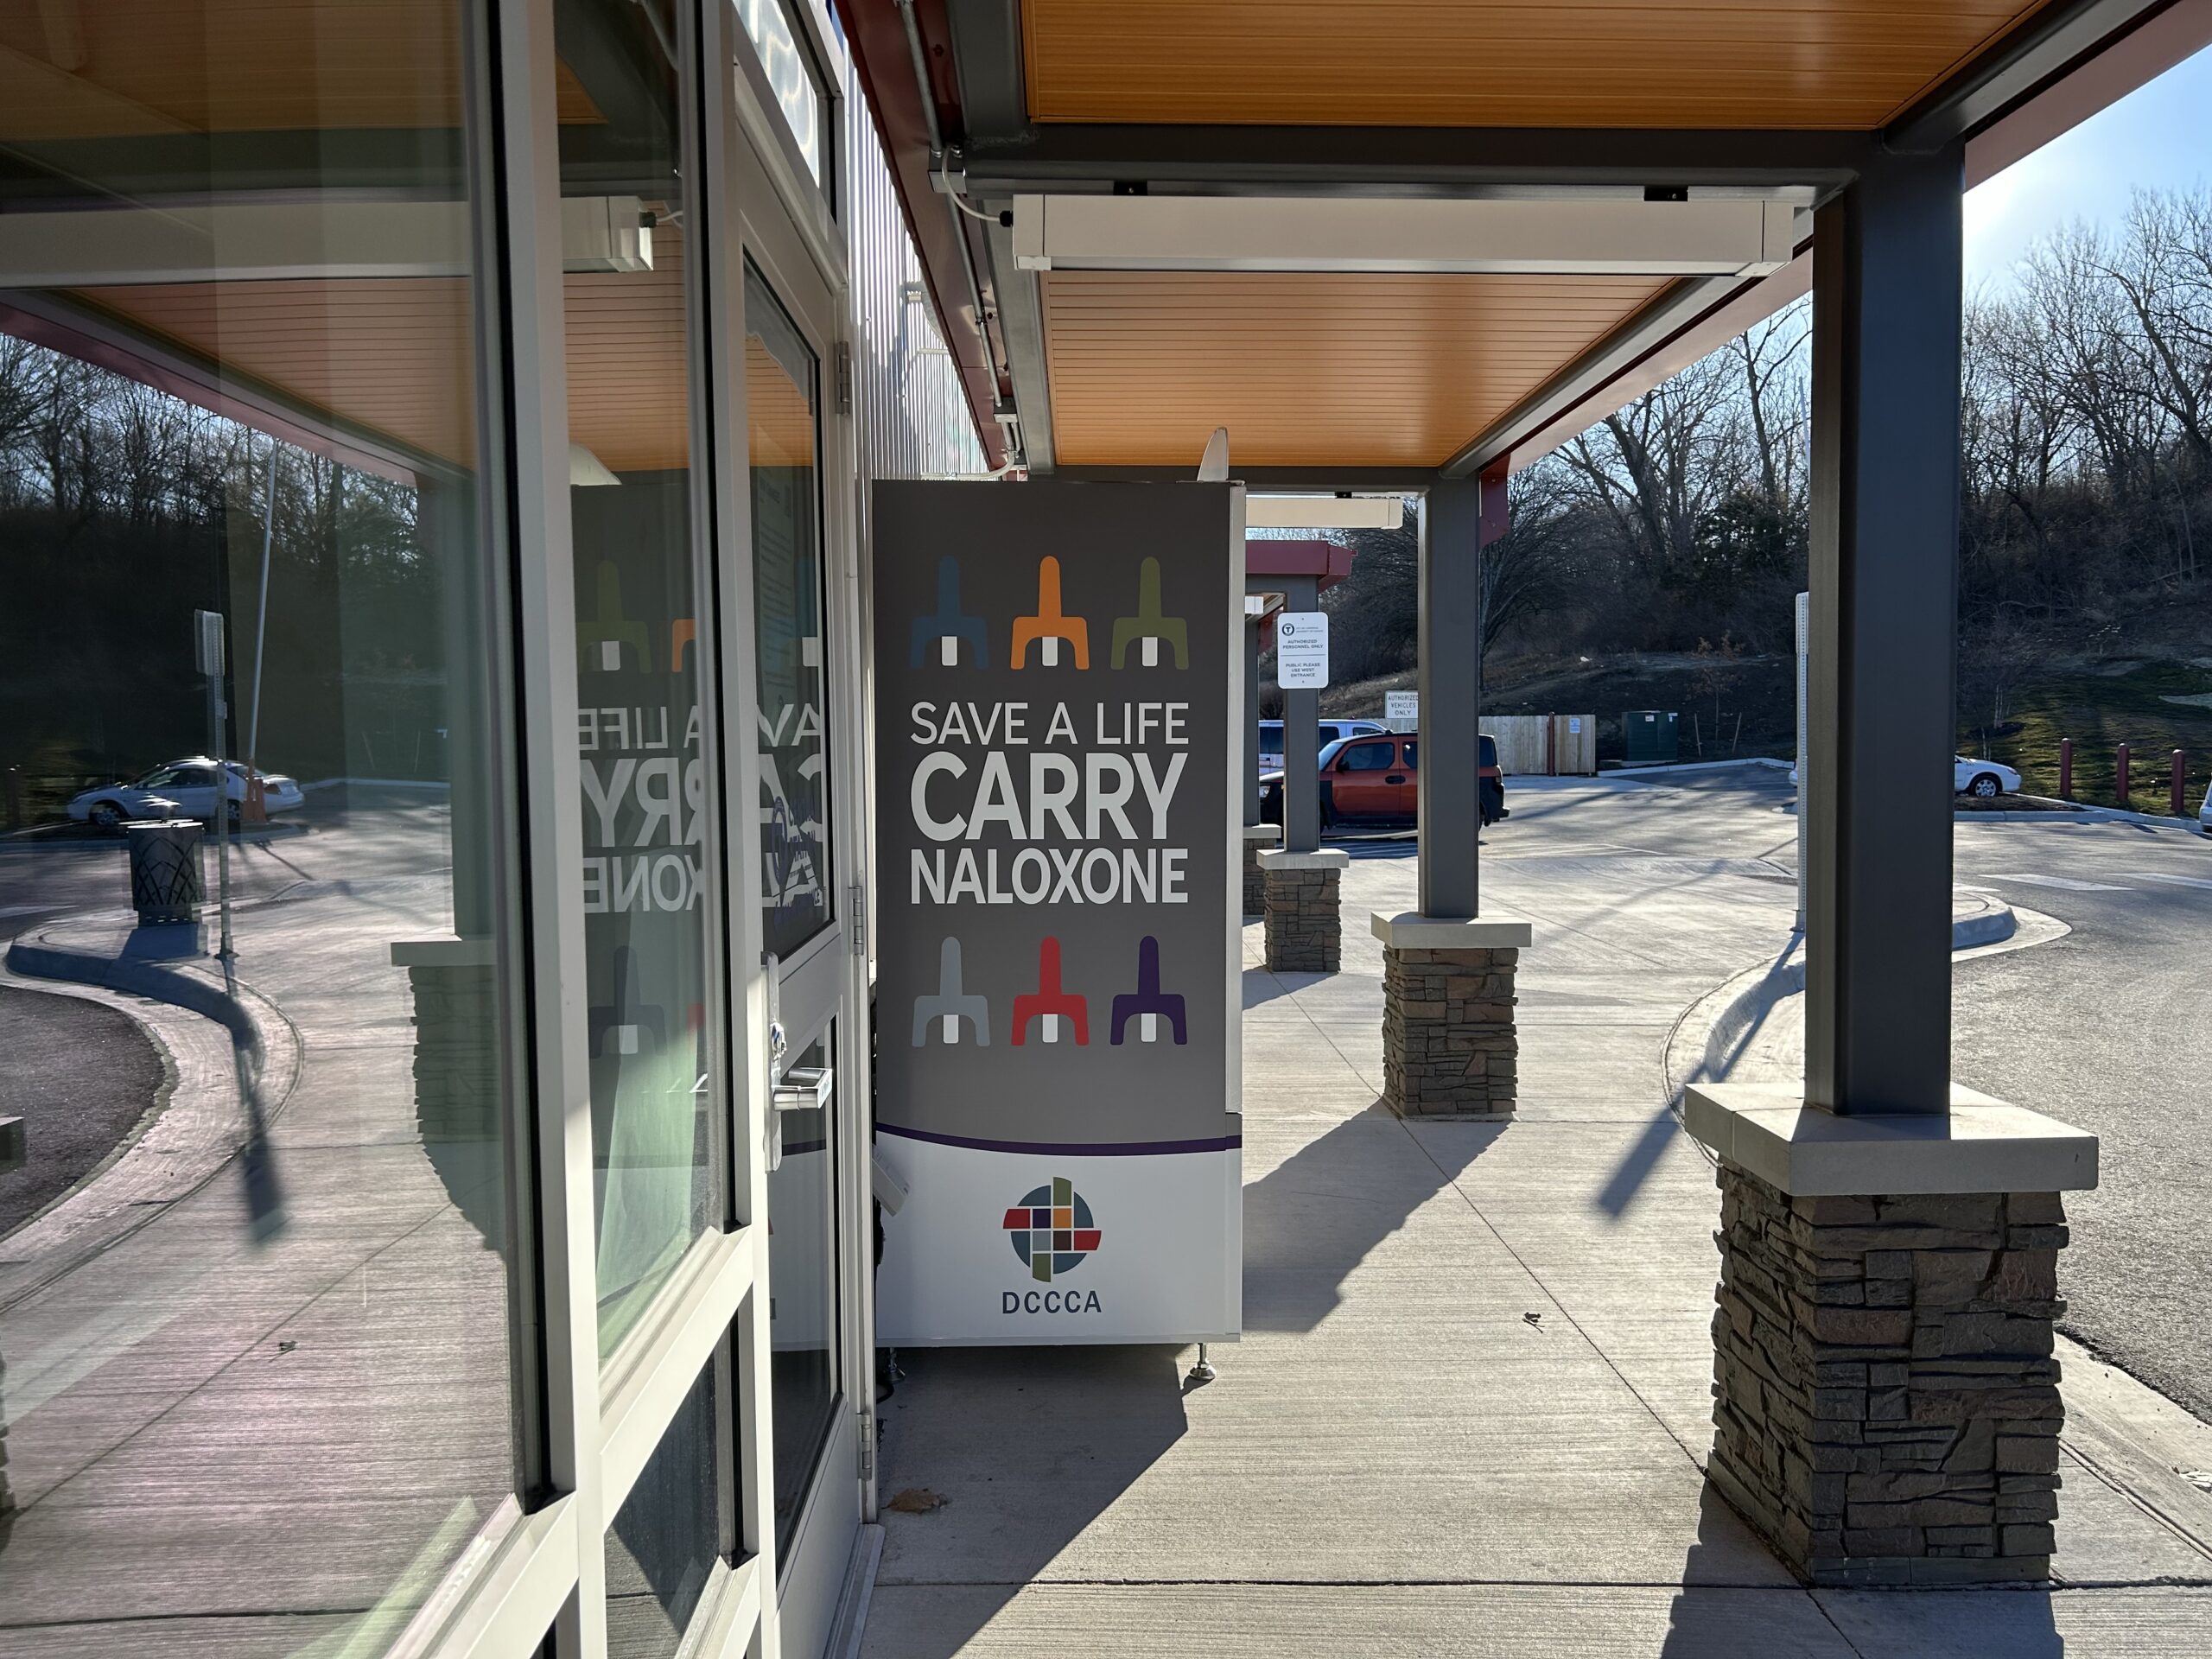 Featured image for “Central Station safety measures; community partners develop first naloxone vending machine in Douglas County”